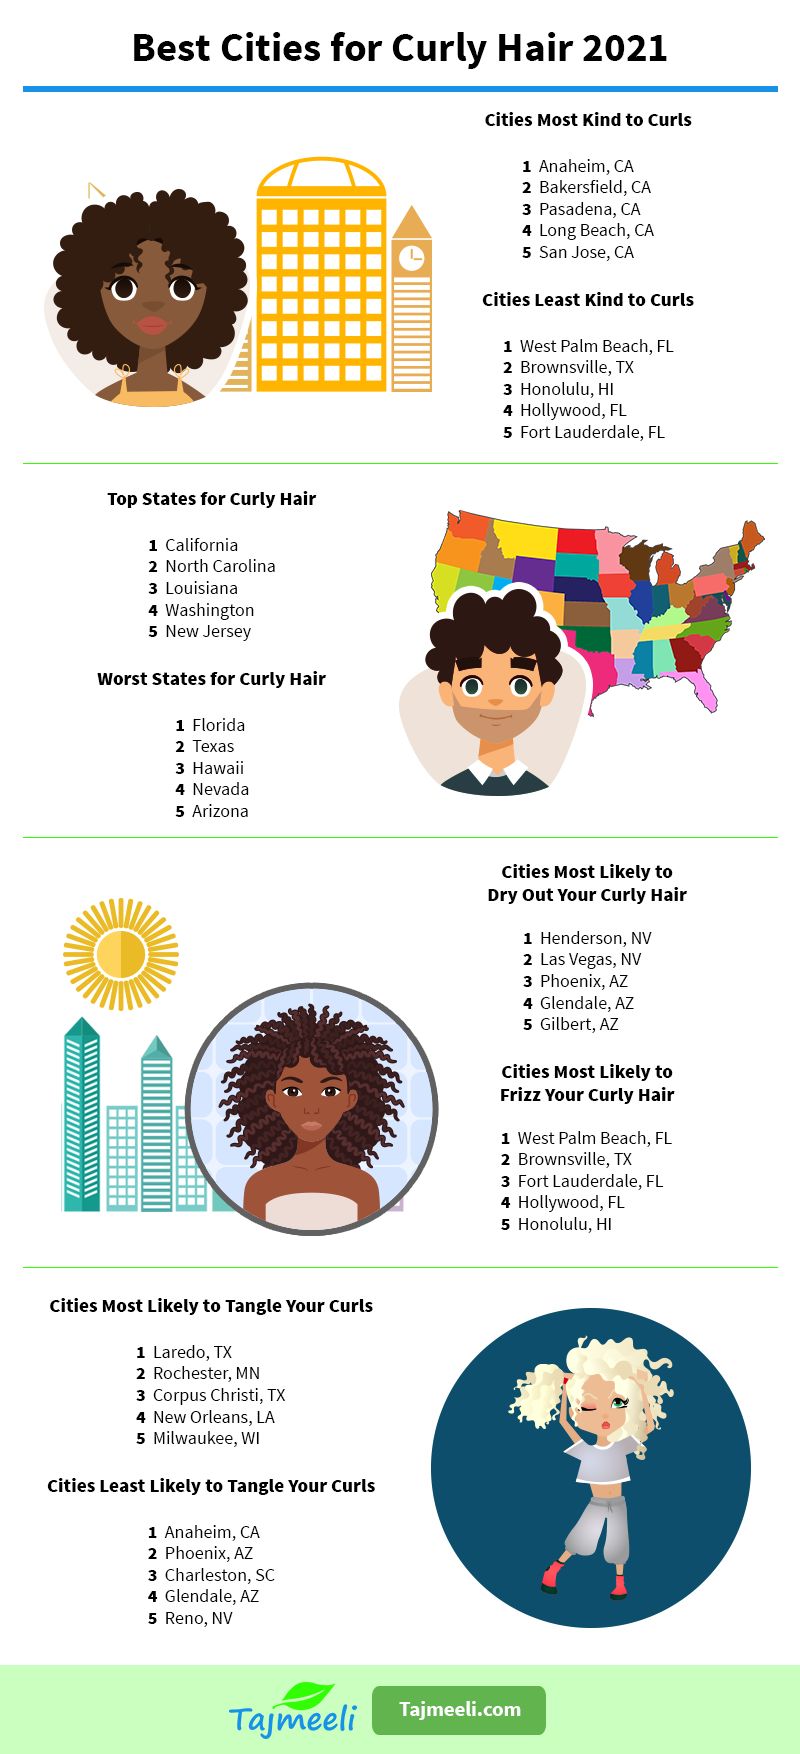 Best Cities for Curly Hair 2021 (1)